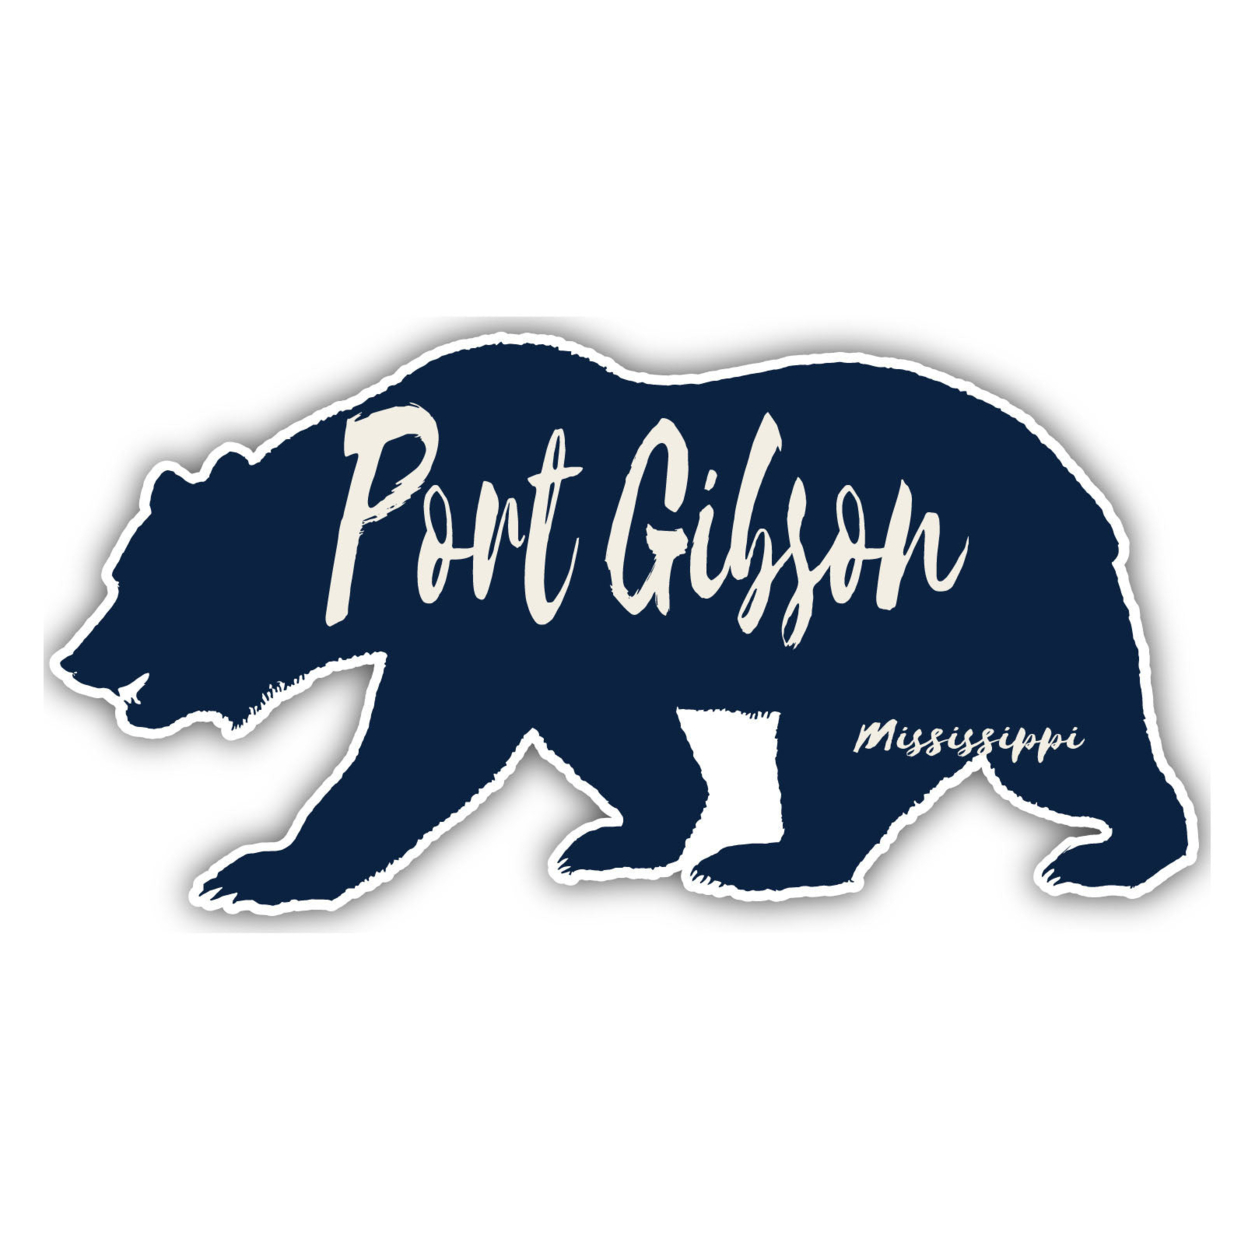 Port Gibson Mississippi Souvenir Decorative Stickers (Choose Theme And Size) - Single Unit, 4-Inch, Bear